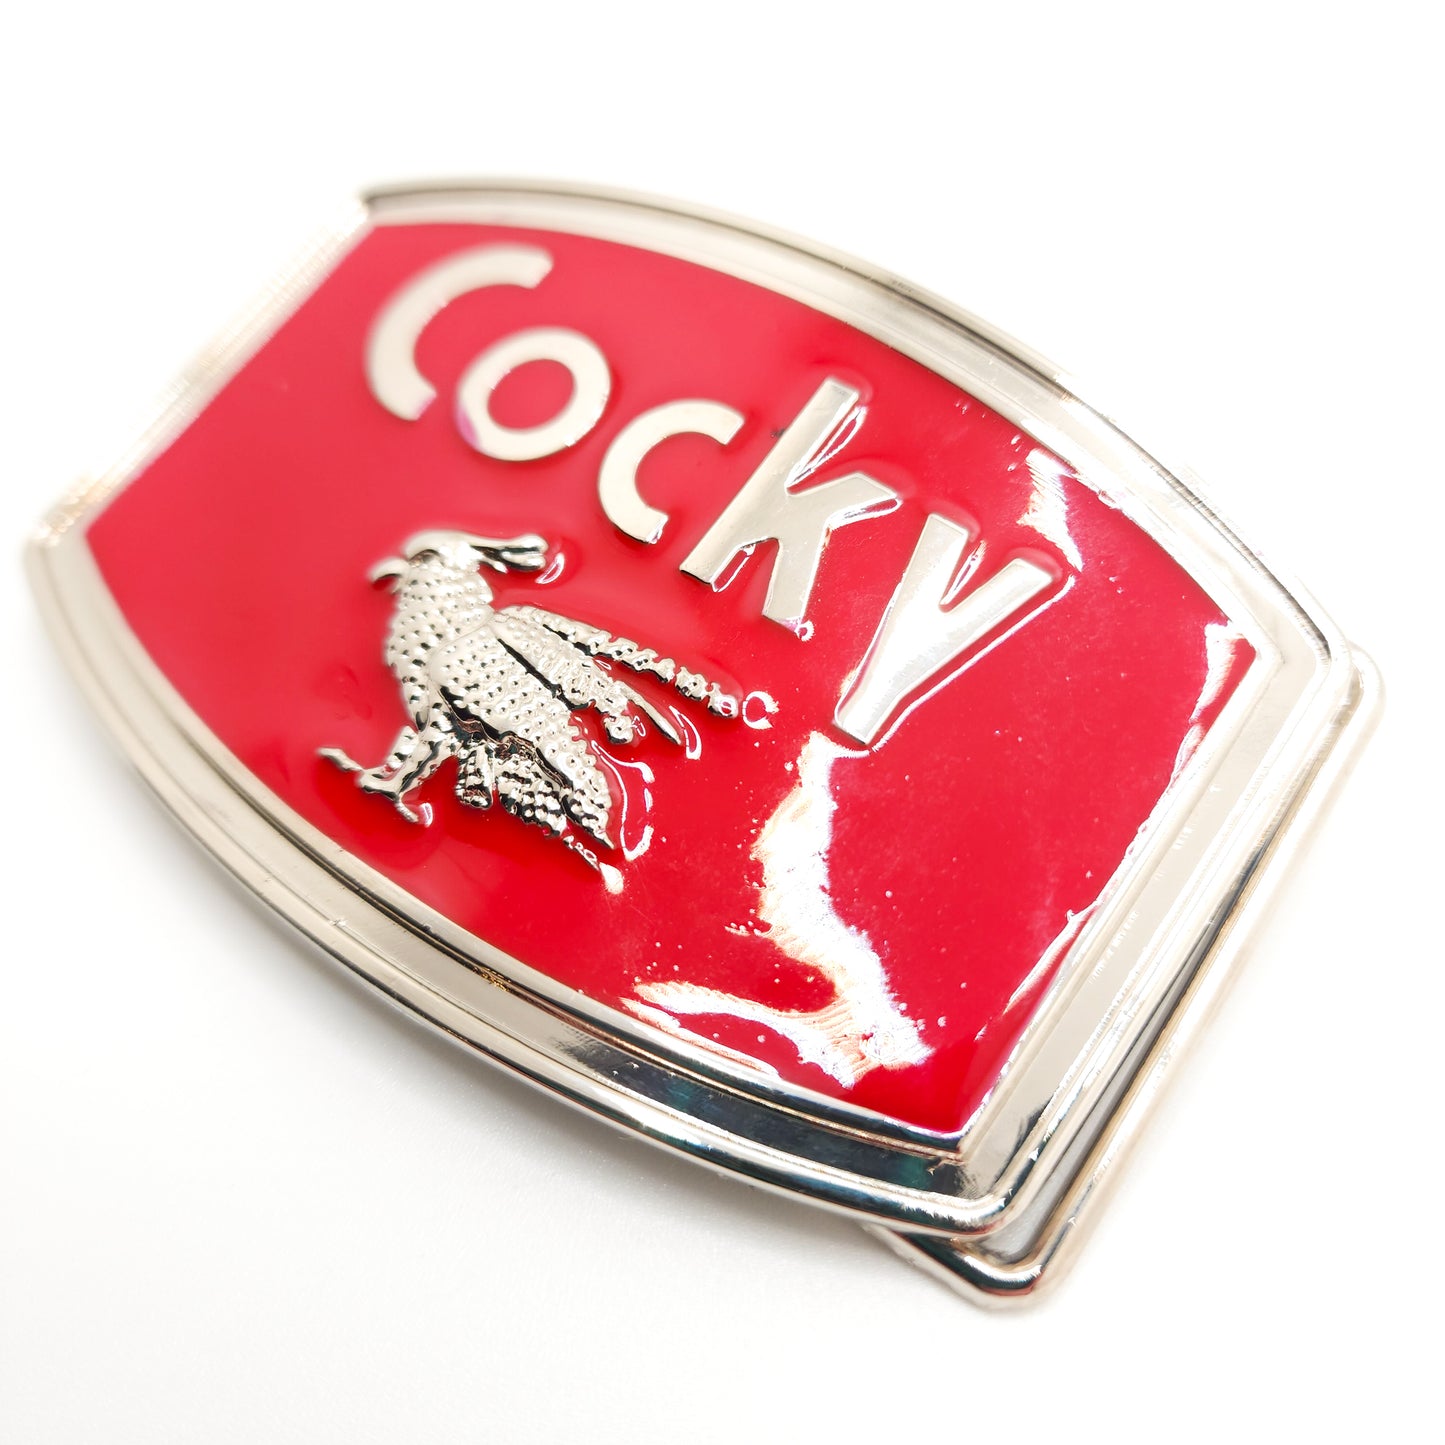 Funny Cocky Rooster Belt Buckle Red Enamel